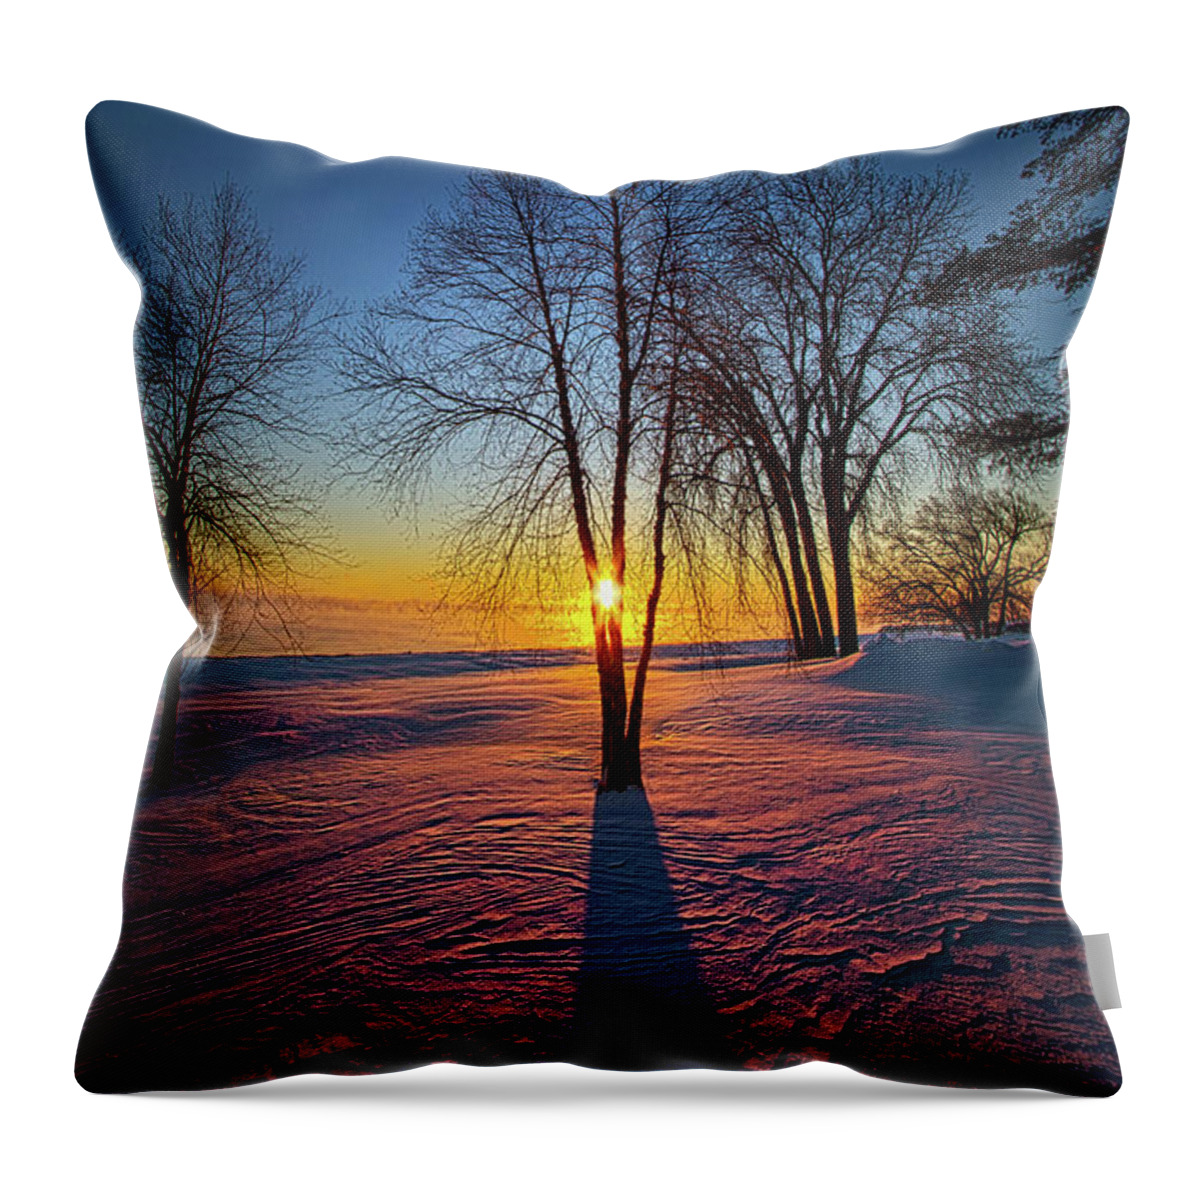 Clouds Throw Pillow featuring the photograph In That Still Place by Phil Koch